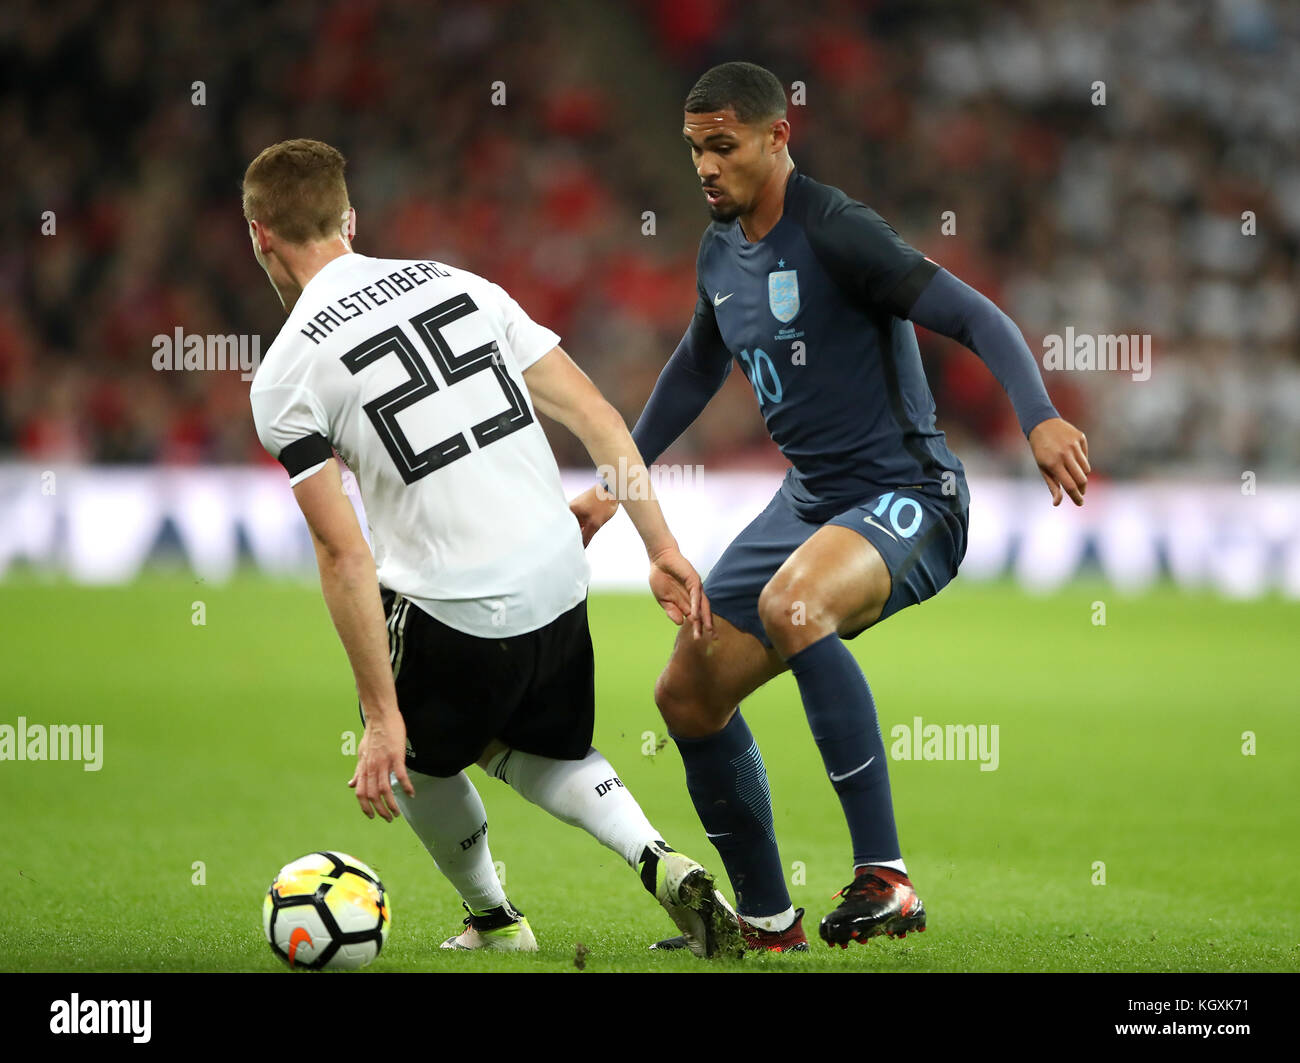 England's Ruben Loftus-Cheek (centre) during the International Friendly match at Wembley Stadium, London. PRESS ASSOCIATION Photo. Picture date: Friday November 10, 2017. See PA story SOCCER England. Photo credit should read: Nick Potts/PA Wire. Stock Photo